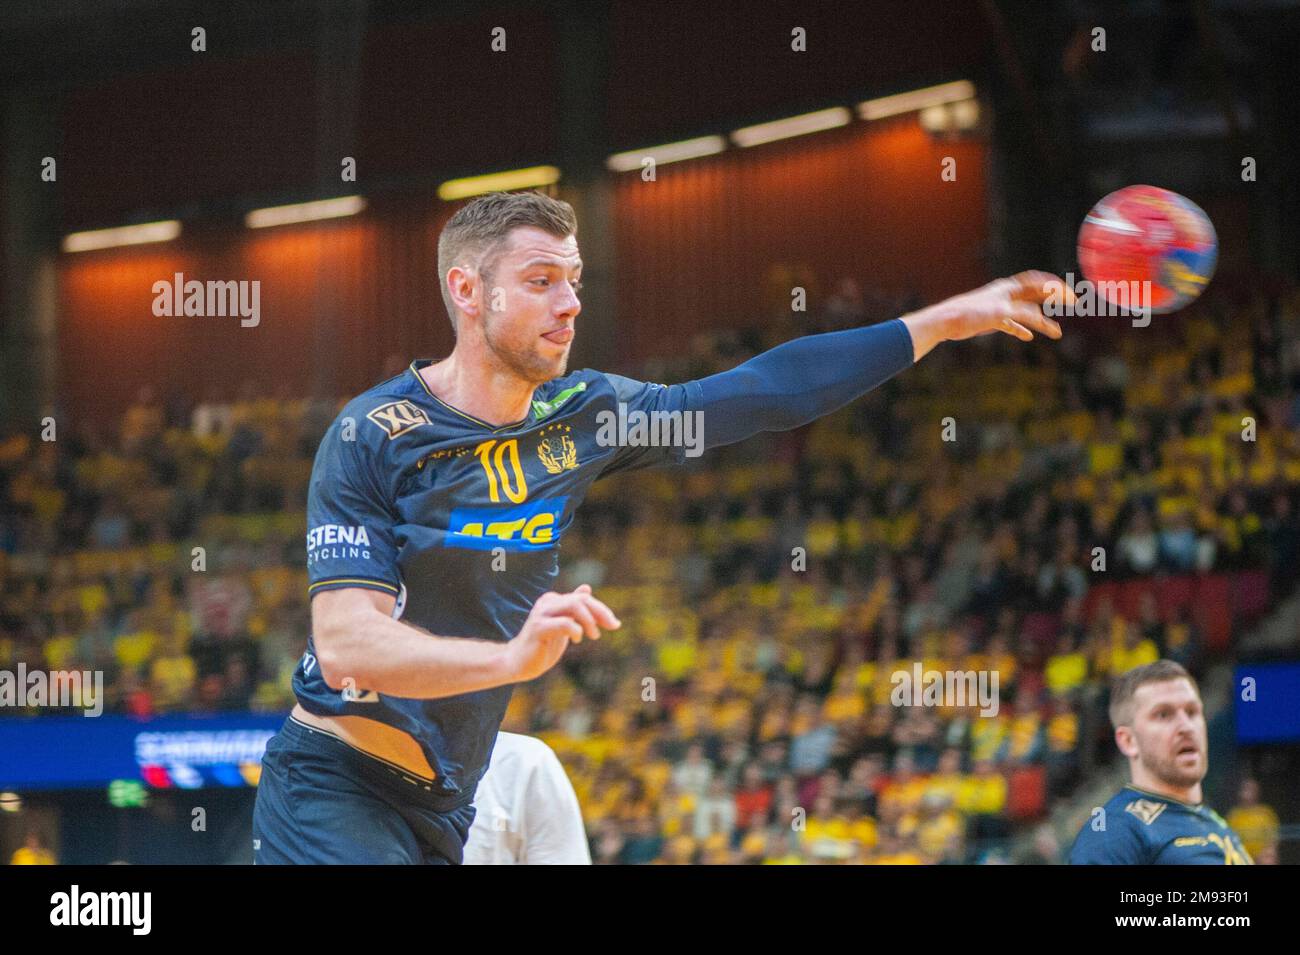 Gothenburg, Sweden. 16th Jan 2023. Niclas Ekberg of Sweden in action during the 2023 IHF World Men’s Handball Championship game between Uruguay and Sweden on January 16th, 2023 in Gothenburg. Credit: Oskar Olteus / Alamy Live News Stock Photo